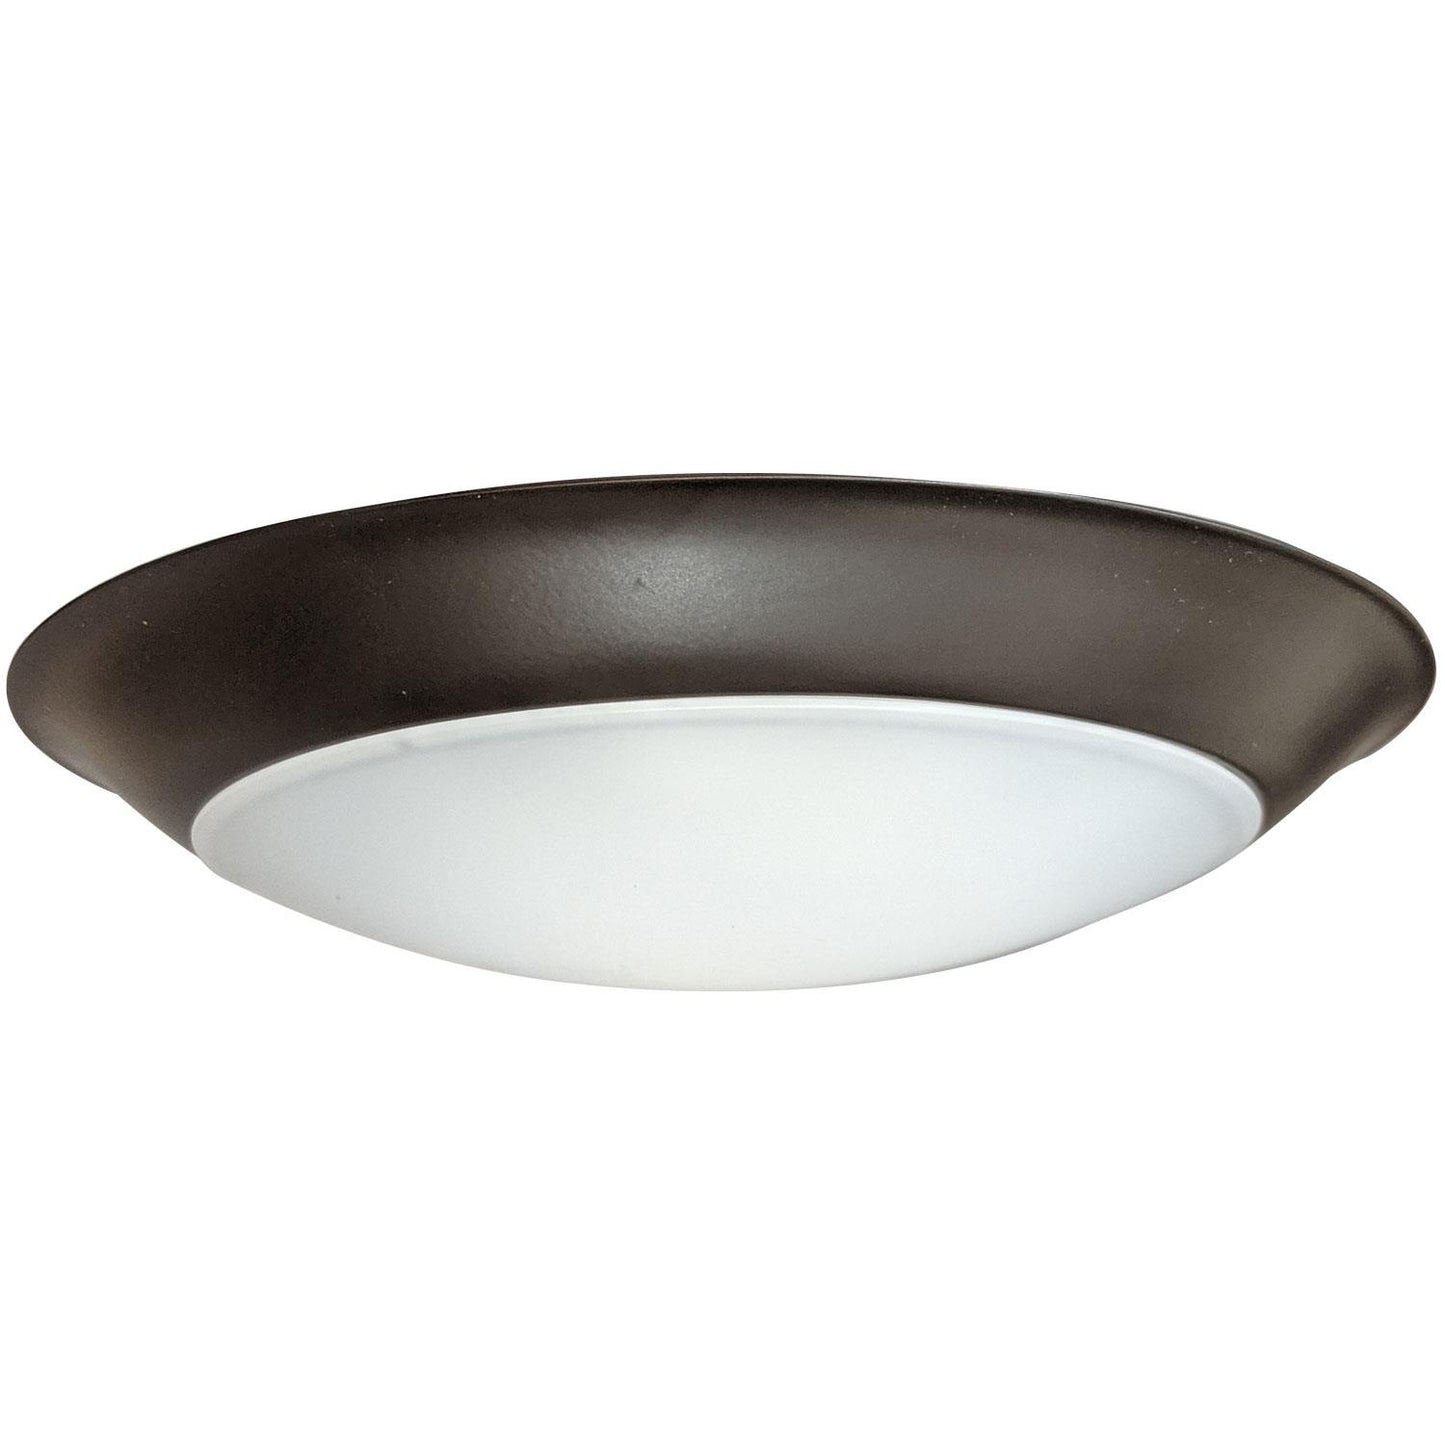 Sunlite 88385-SU LED 6-Inch Slim Disc Ceiling Fixture, 13 Watts (100W Equivalent) 750 Lumnes, 90 CRI, Dimmable, Bronze Trim, Energy Star, UL Listed, 30K - Warm White 1 Pack